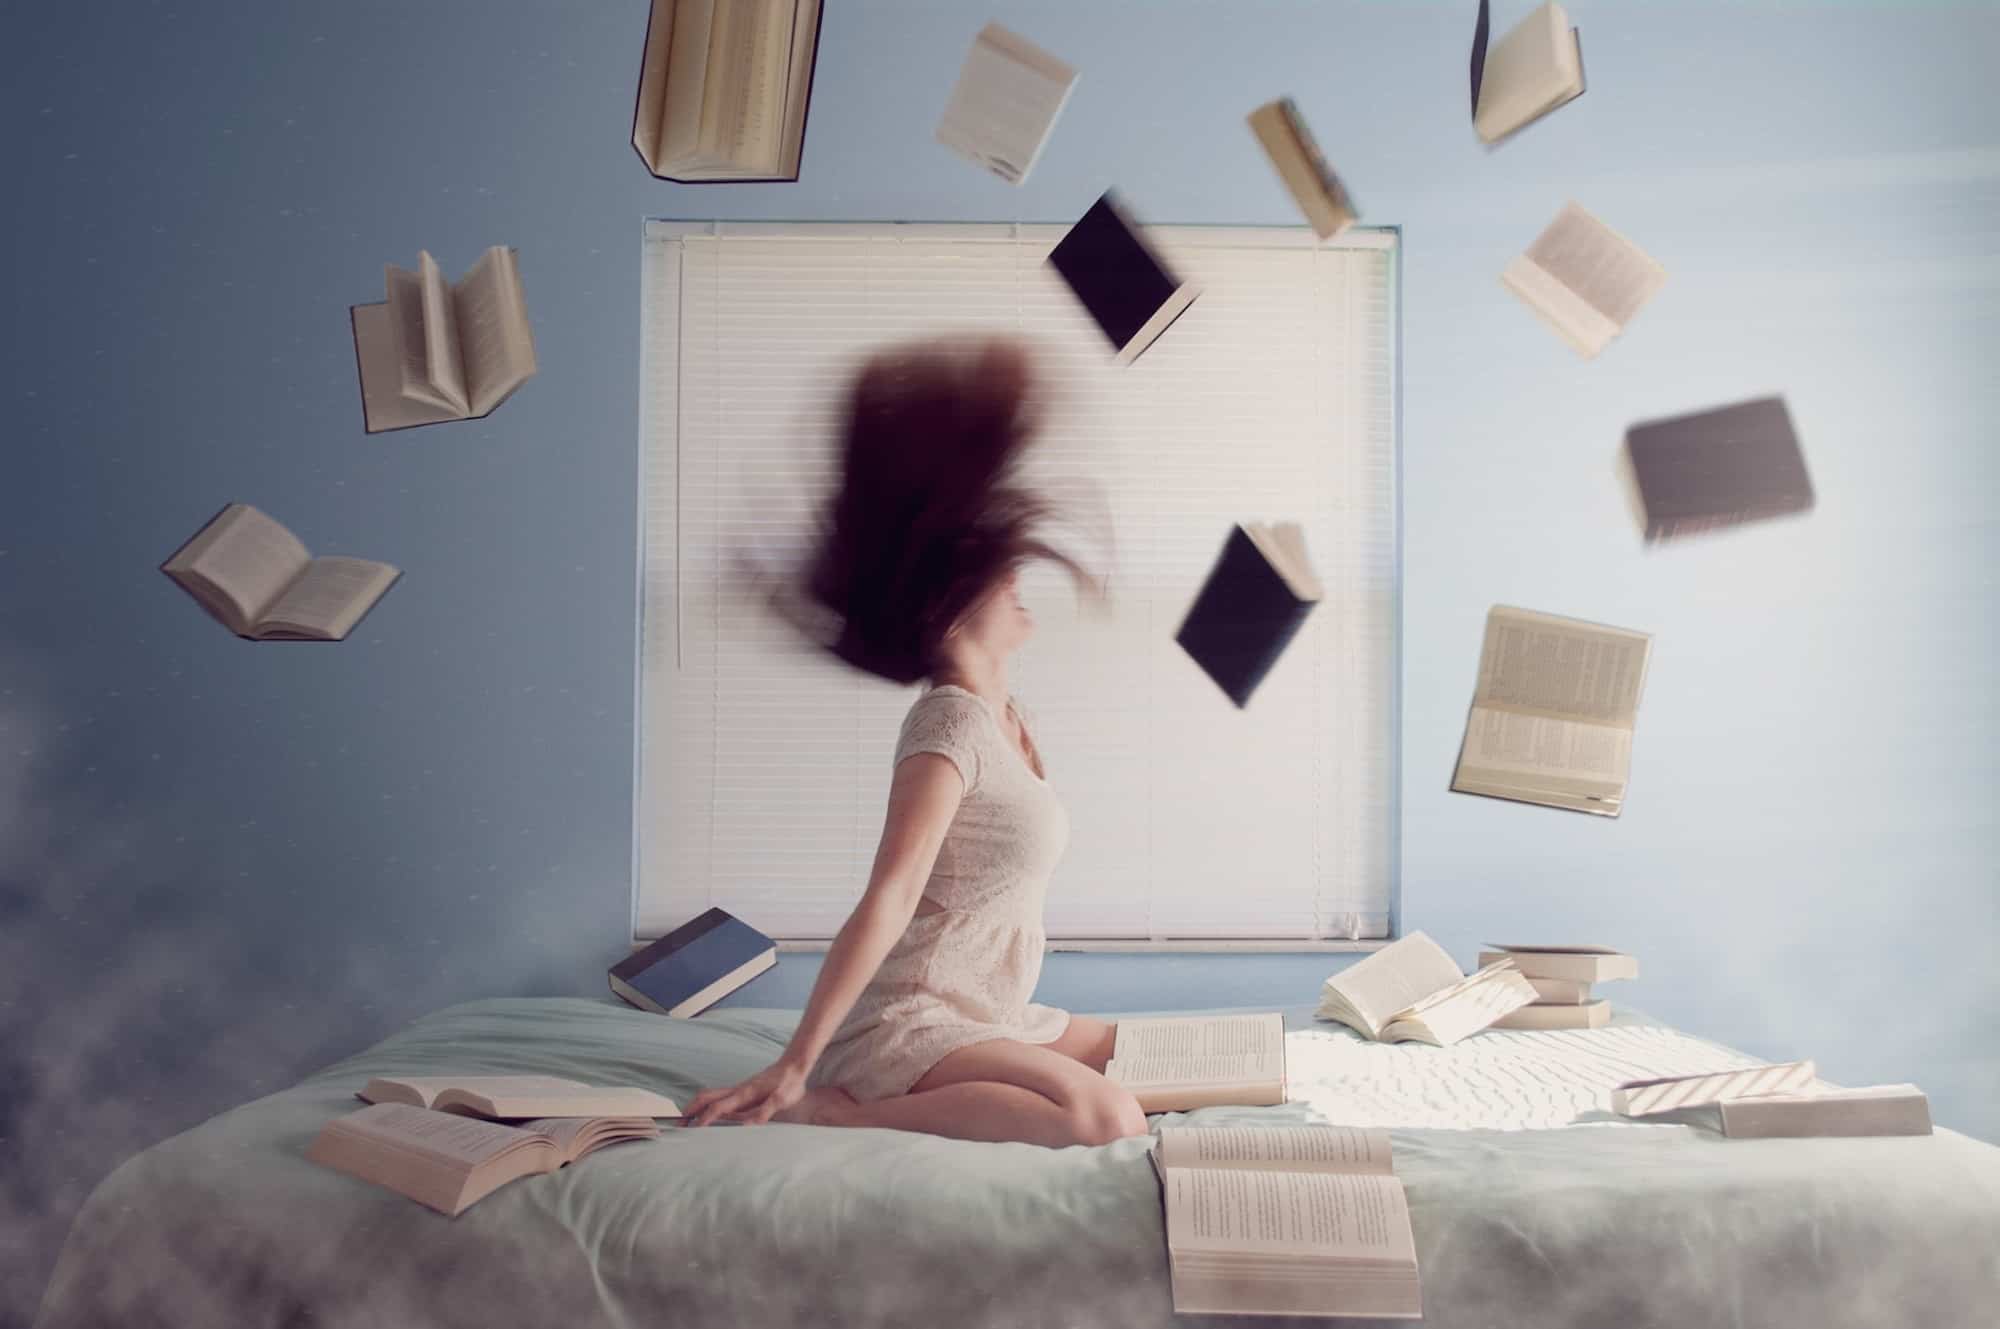 Learning French can get frustrating but don't give up, like this girl sat on her bed, throwing books up in the air.